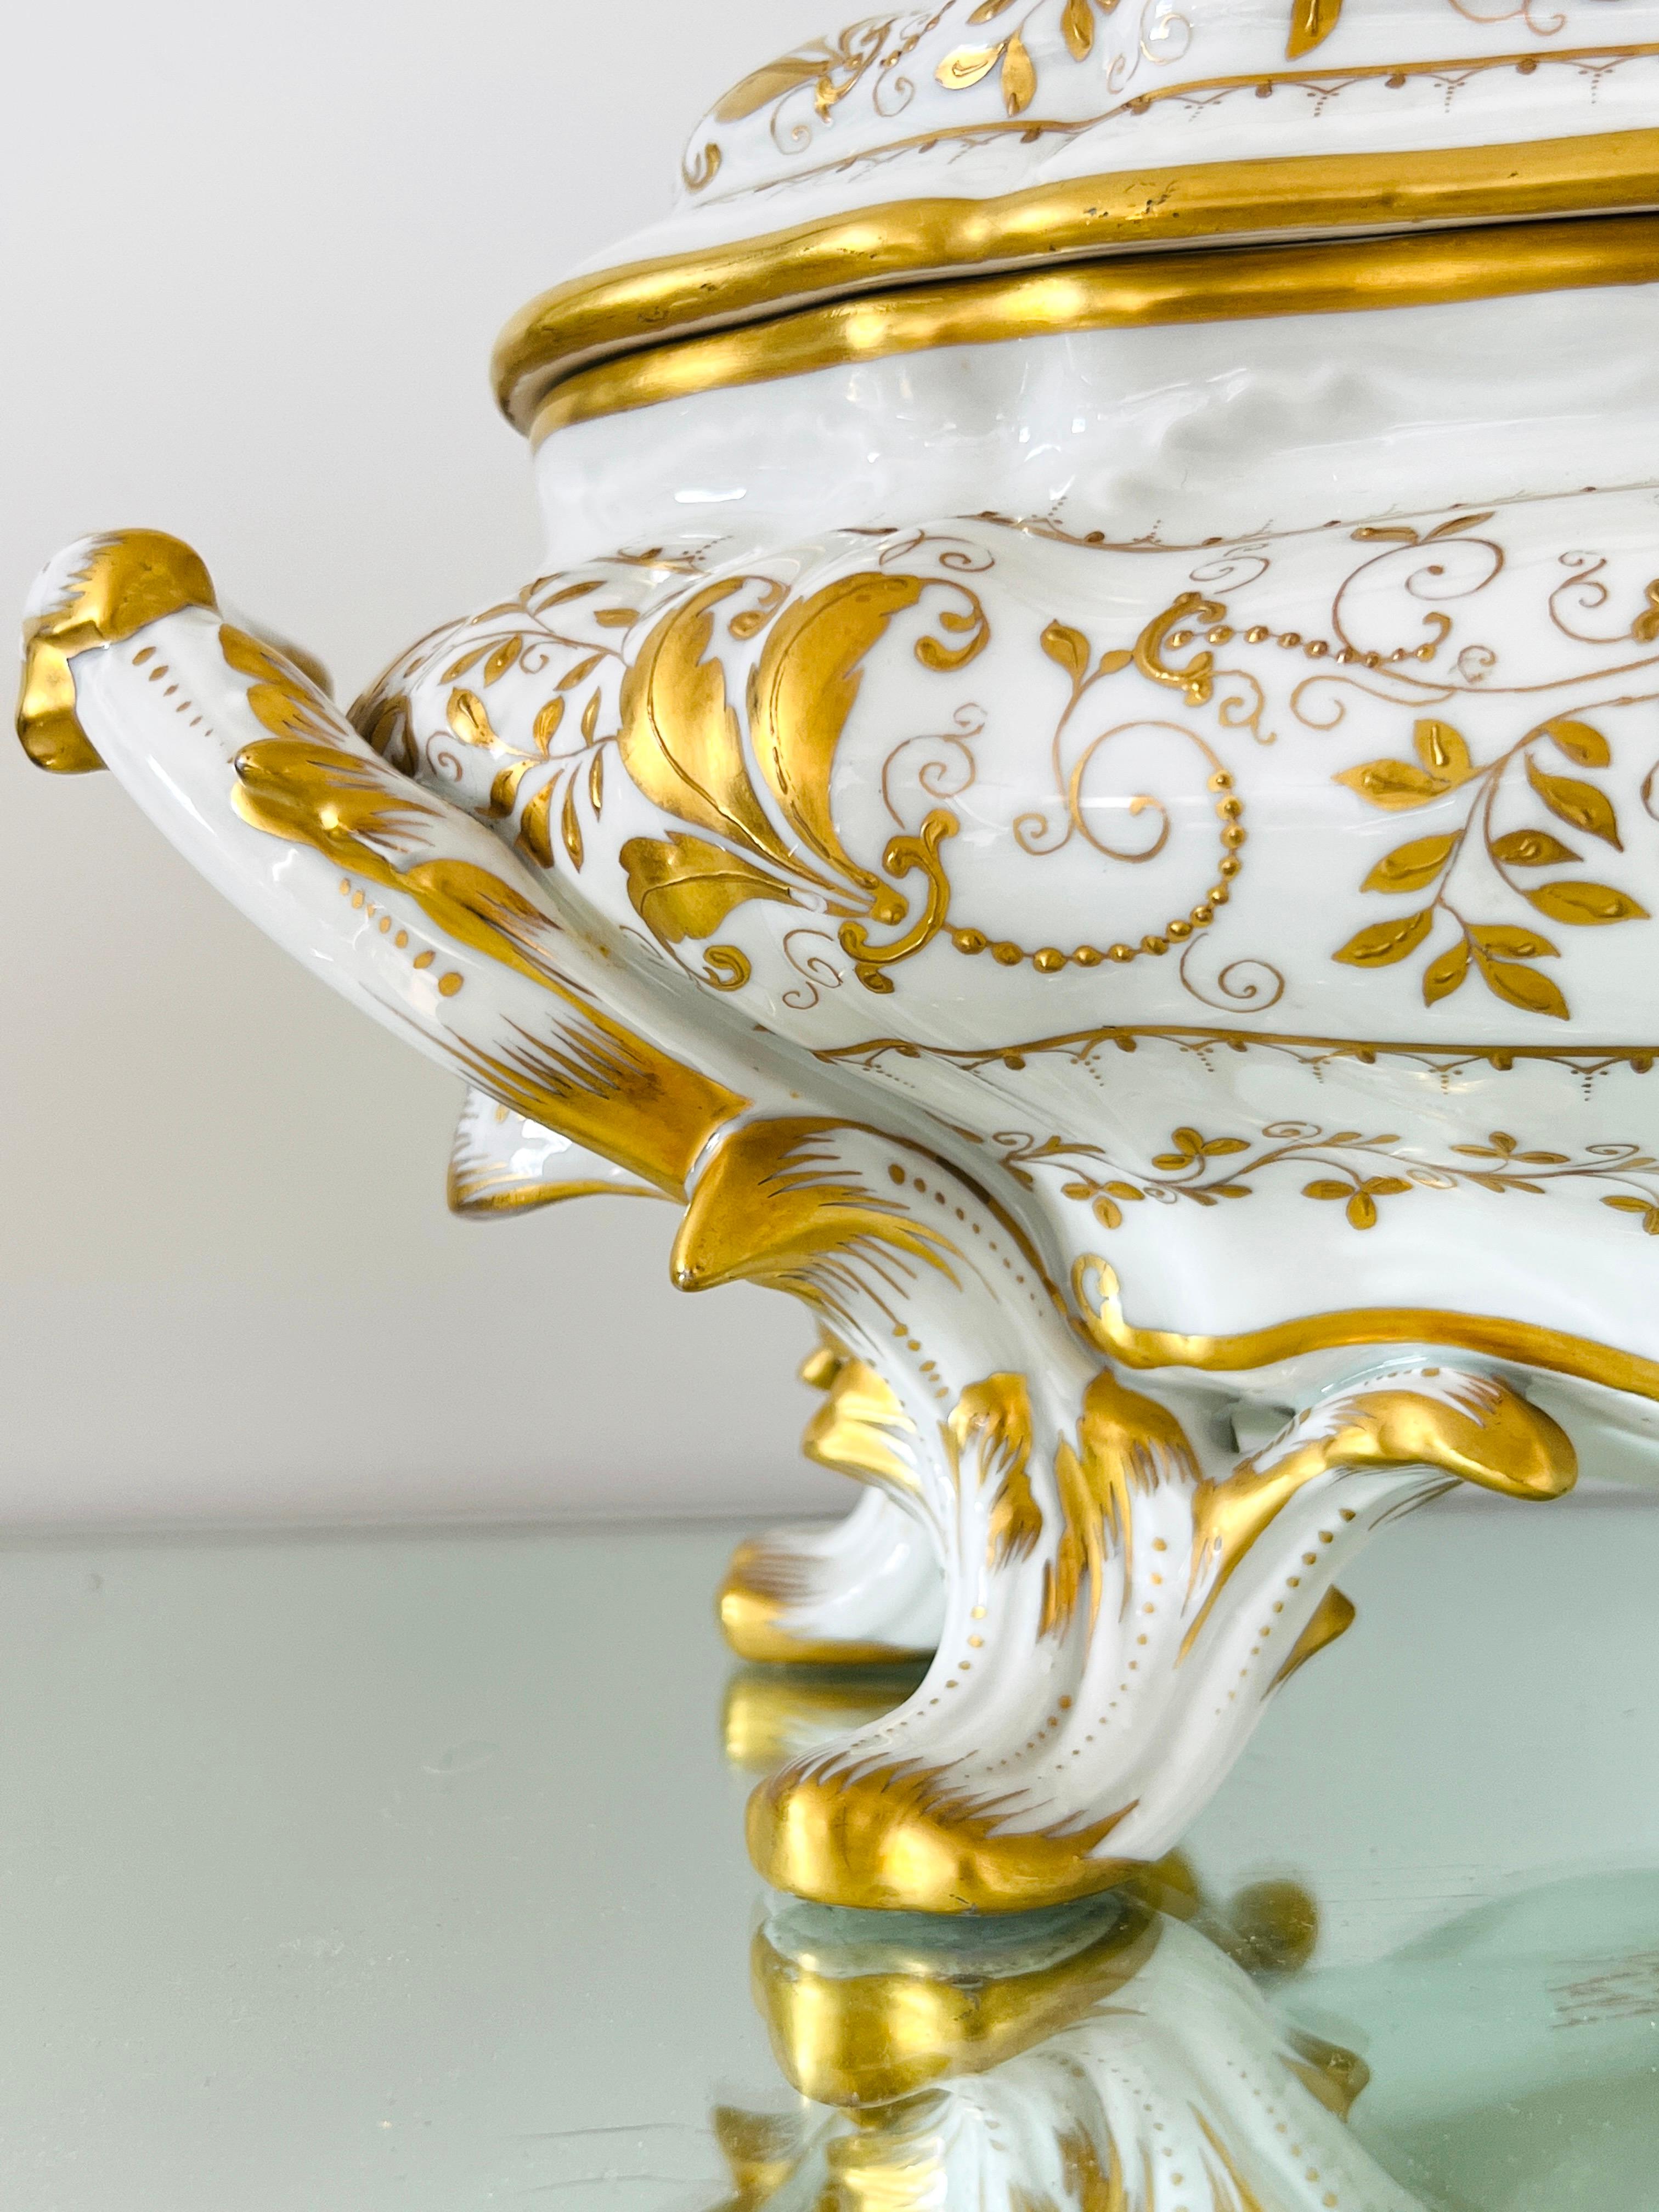 Hand-Crafted Le Tallec Hand Painted Porcelain Tureen with Gold Leaf Motifs, Paris, circa 1960 For Sale